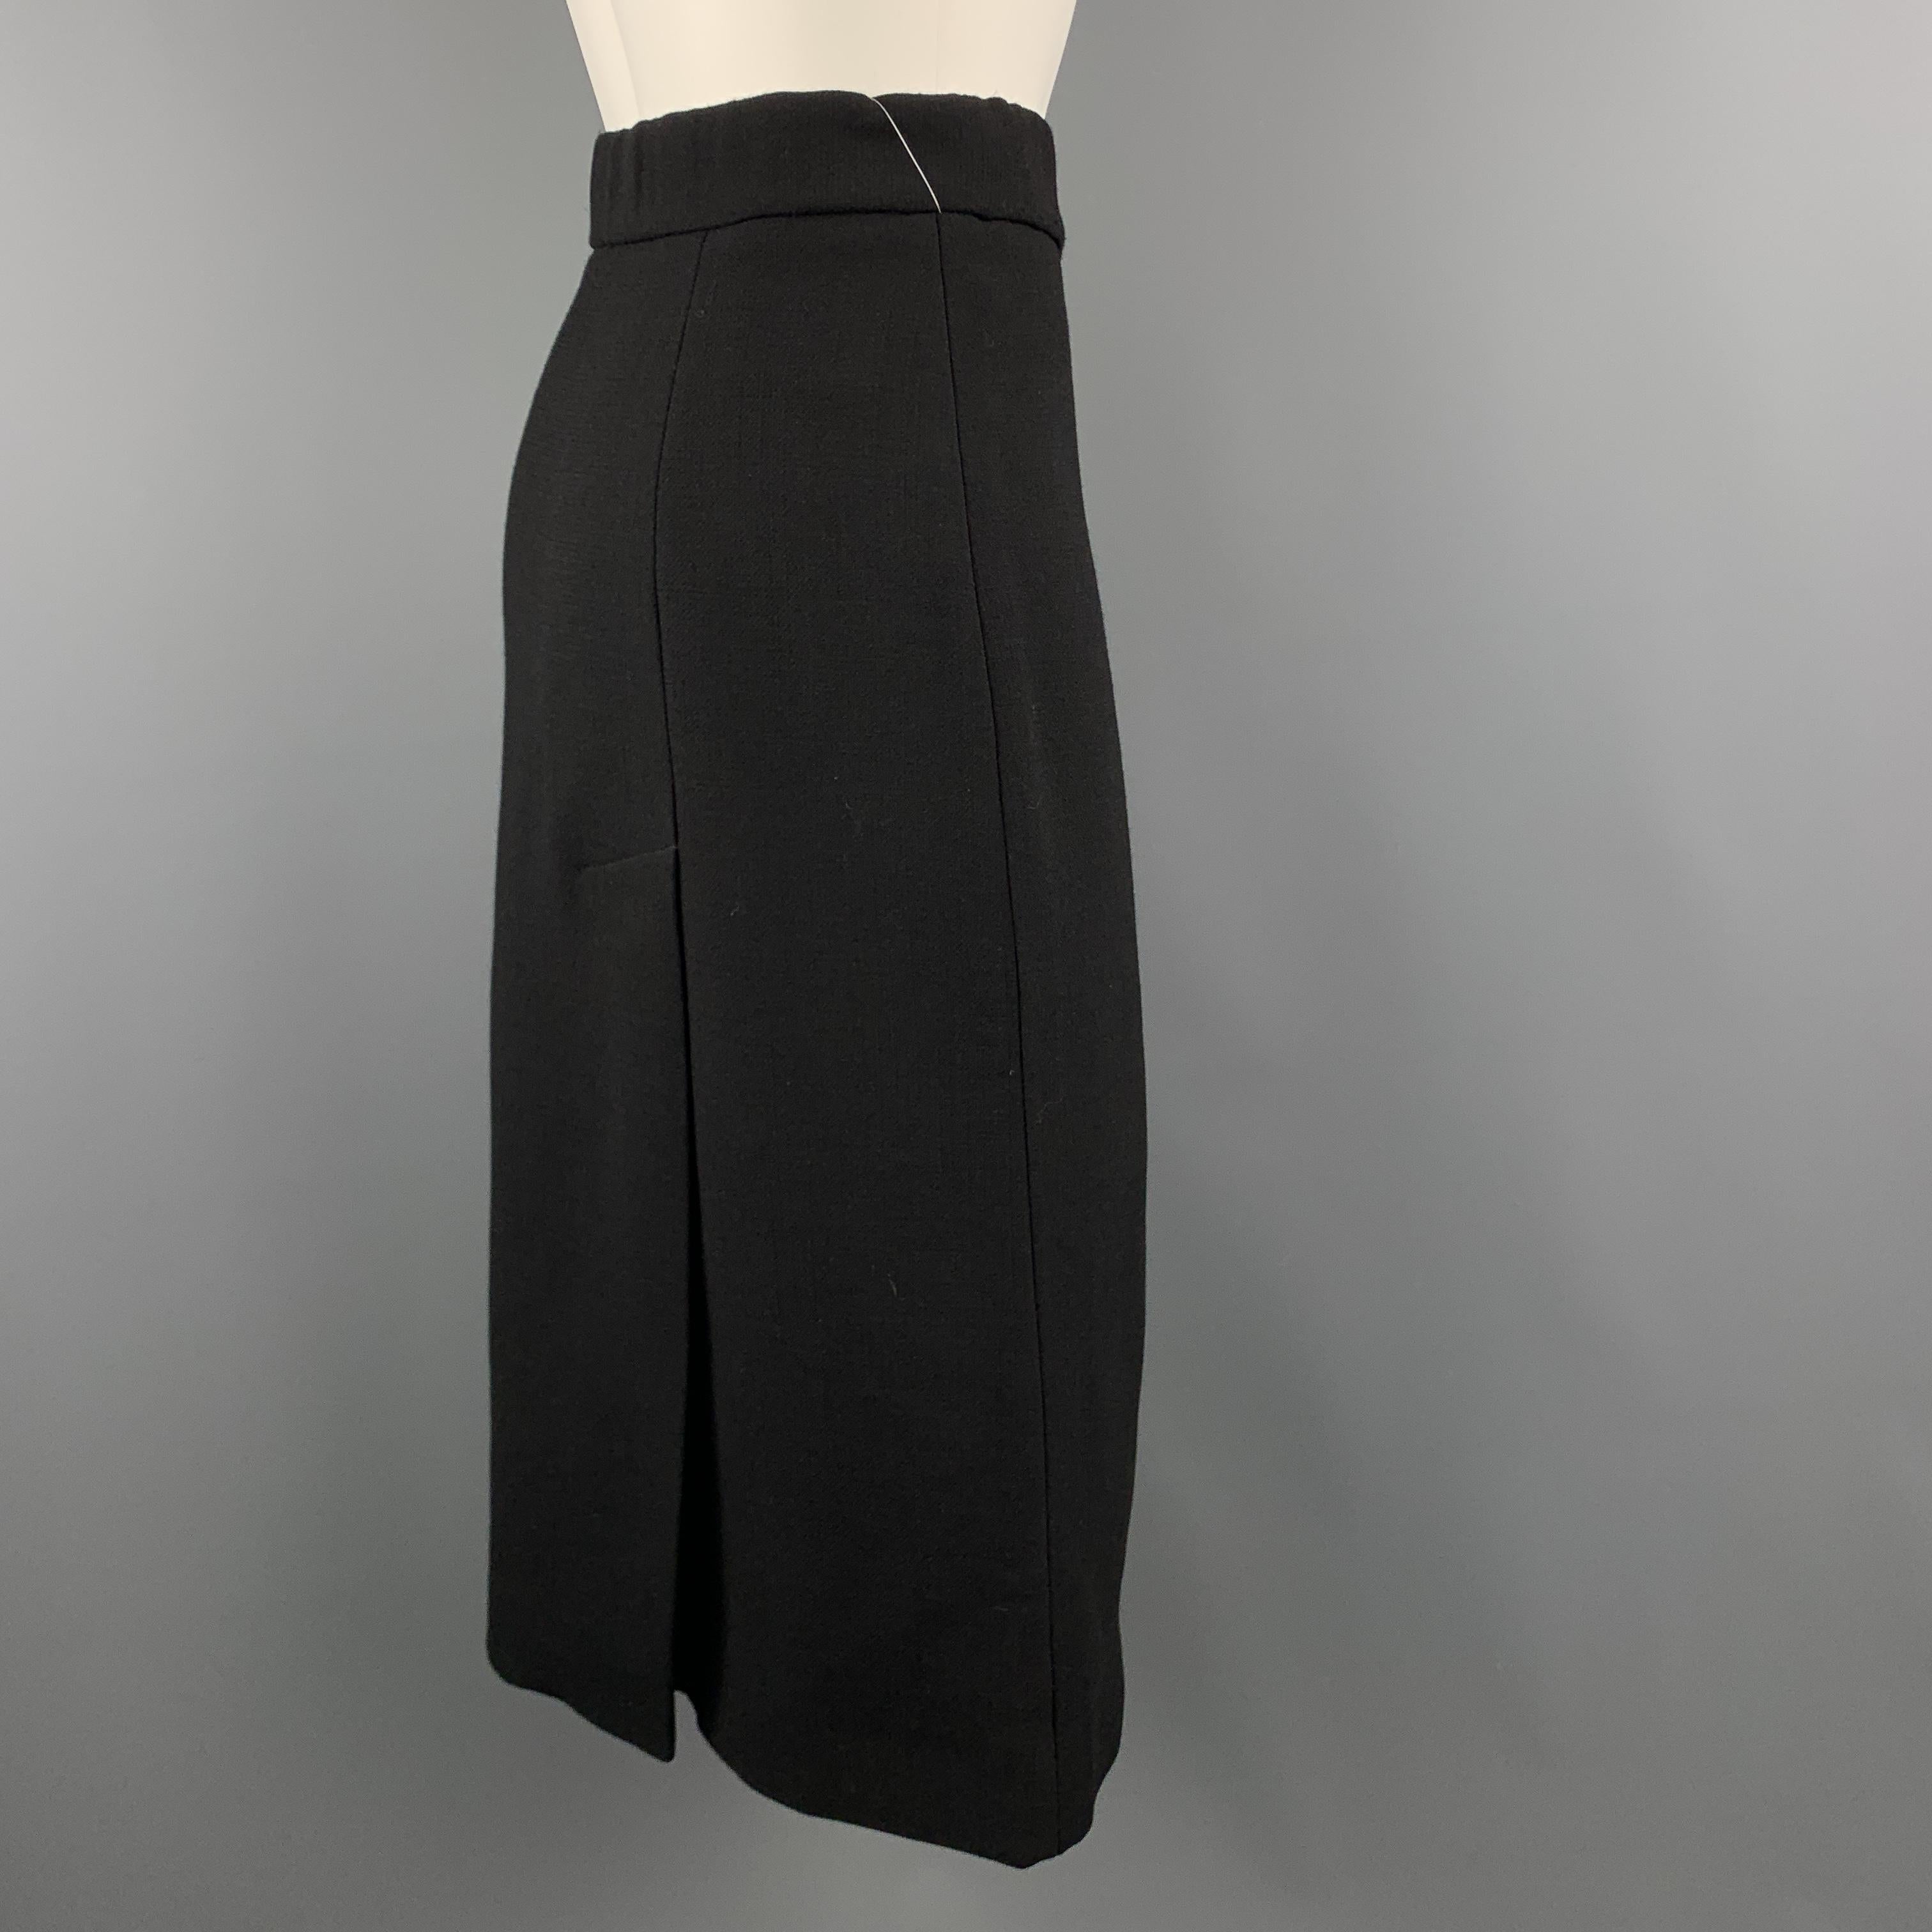 MARNI skirt comes in structured black wool with an A line silhouette and side slits. Made in Italy.

Excellent Pre-Owned Condition.
Marked: IT 40
 
Measurements:

Waist: 27 in.
Hip: 36 in.
Length: 27 in.